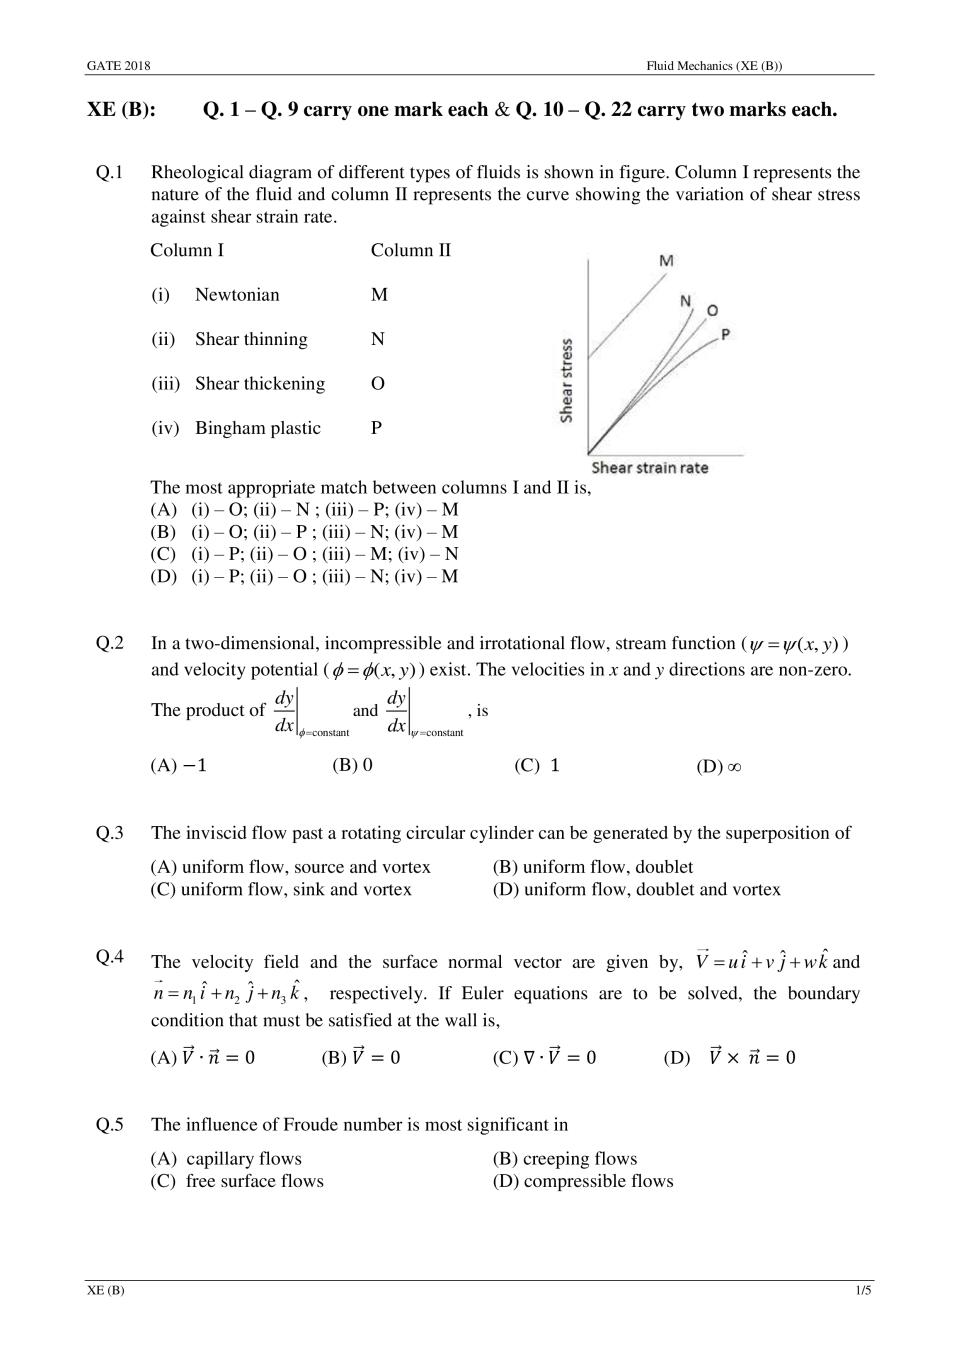 GATE 2018 Fluid Mechanics (XE -B) Question Paper with Answer - Page 1